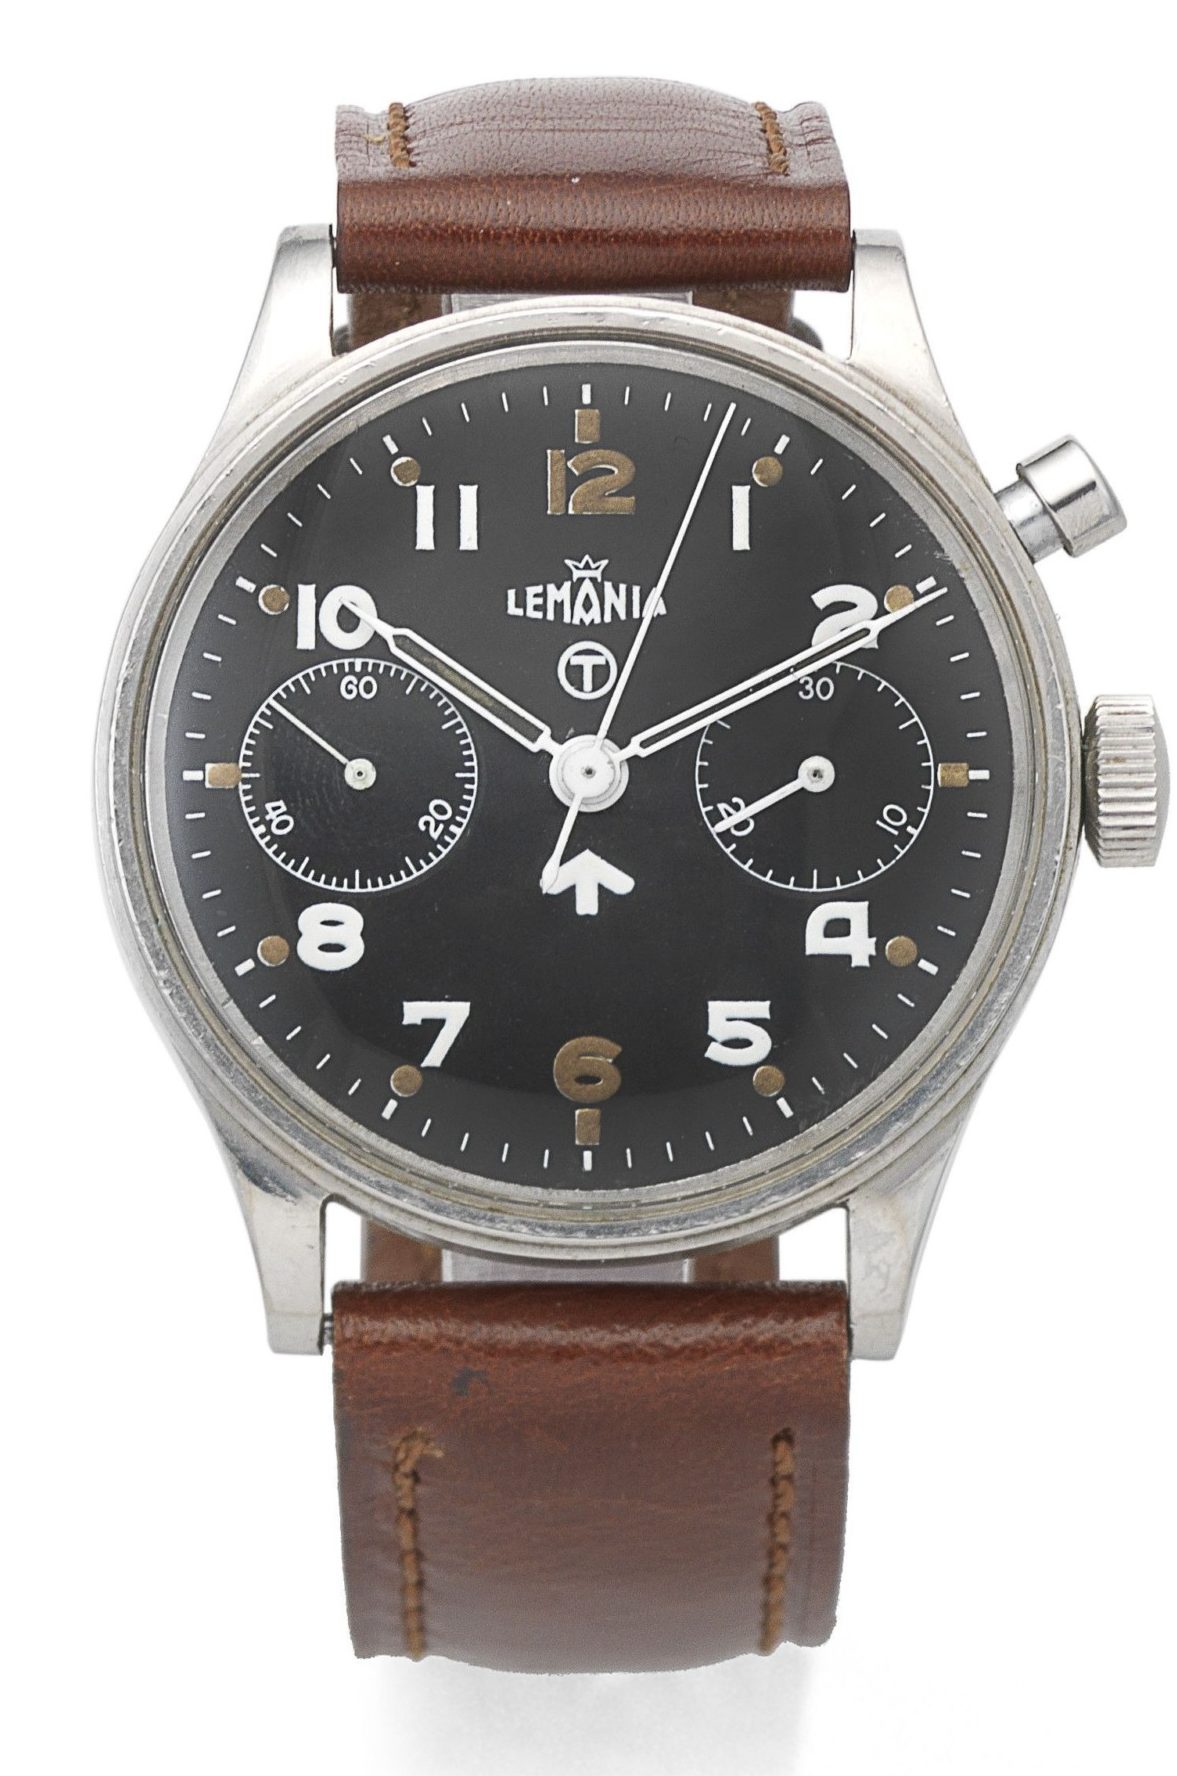 A lemania stainless steel manual wind single button chronograph wristwatch circa 1950 has an estimate of £1,500-2,000.